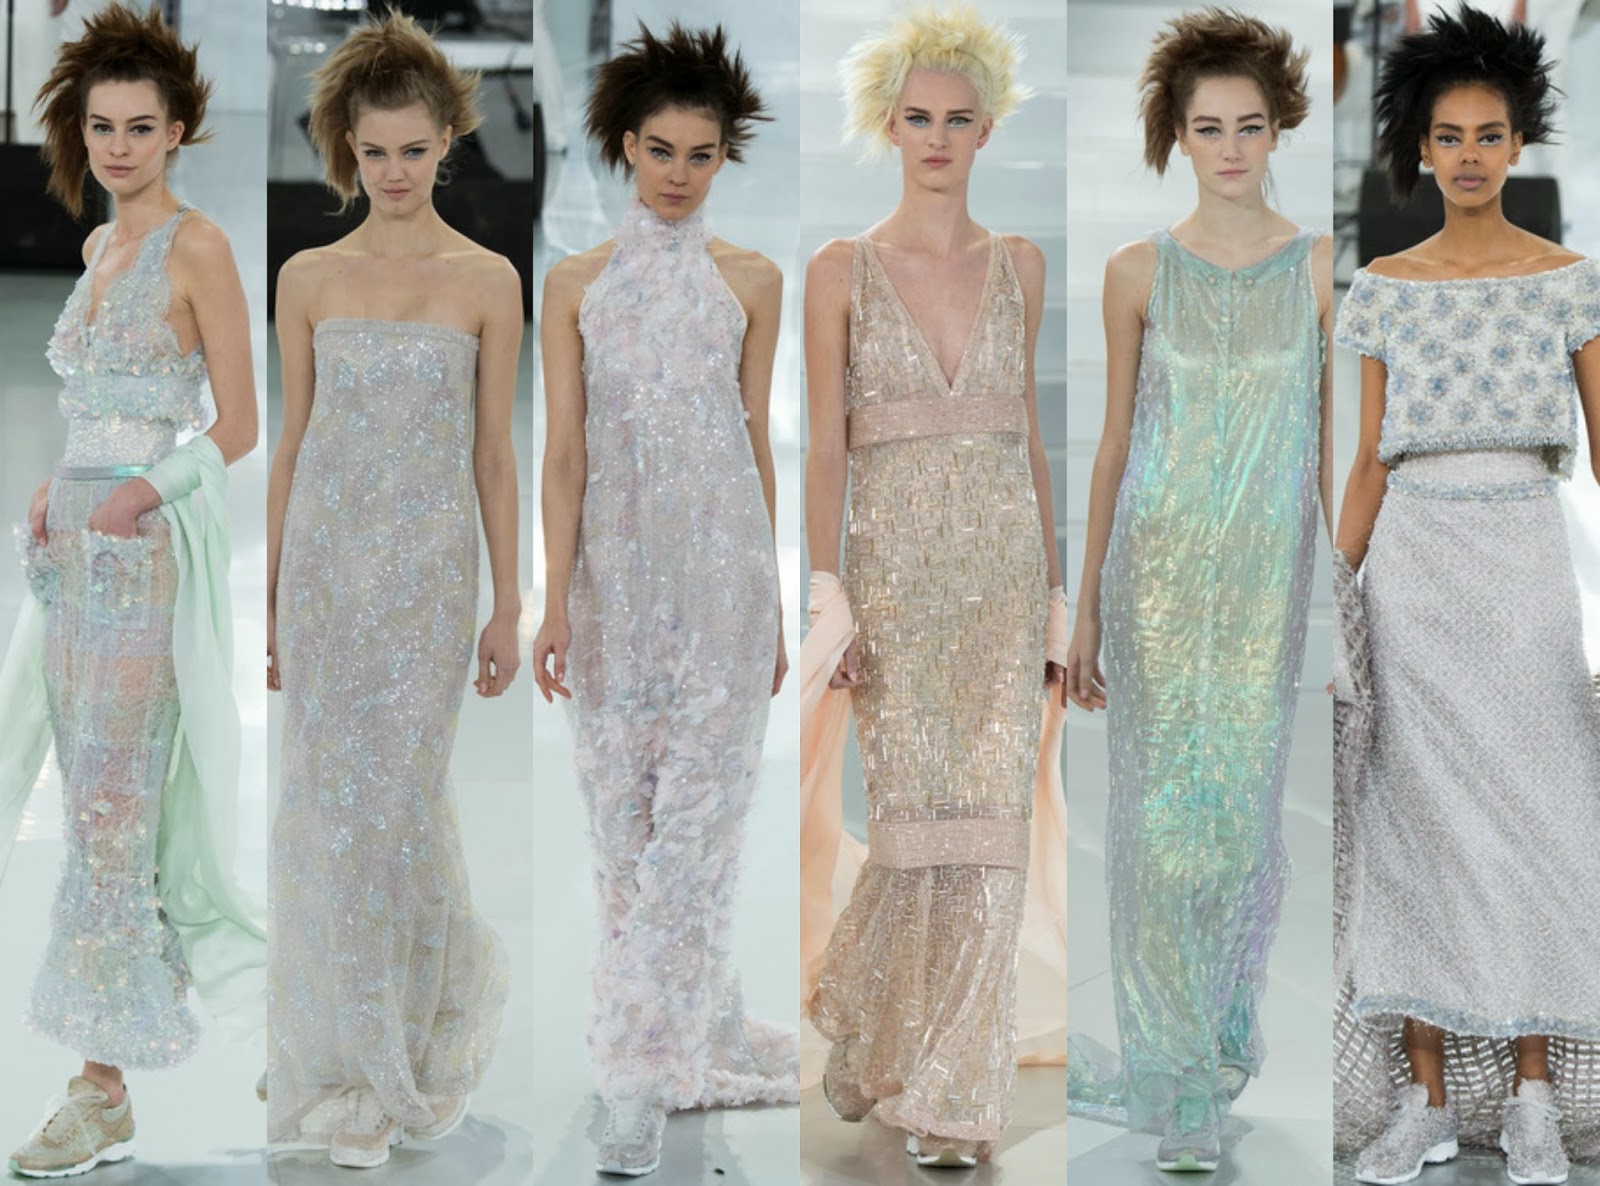 confessions of a style cookie: sporty pastels at chanel haute couture